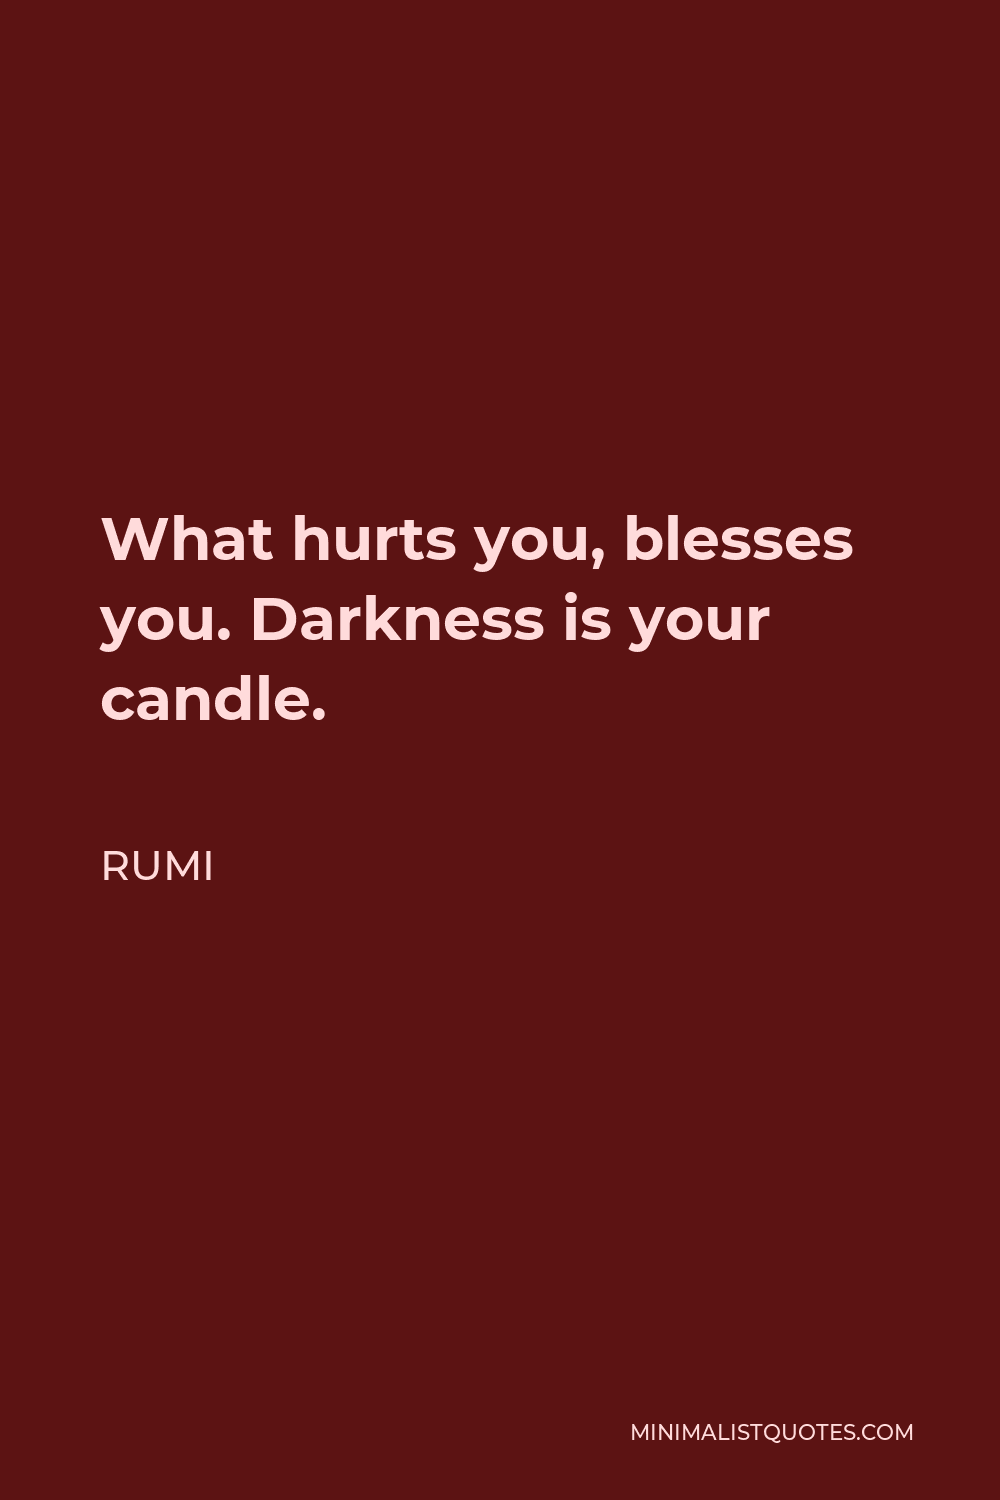 Rumi Quote - What hurts you, blesses you. Darkness is your candle.